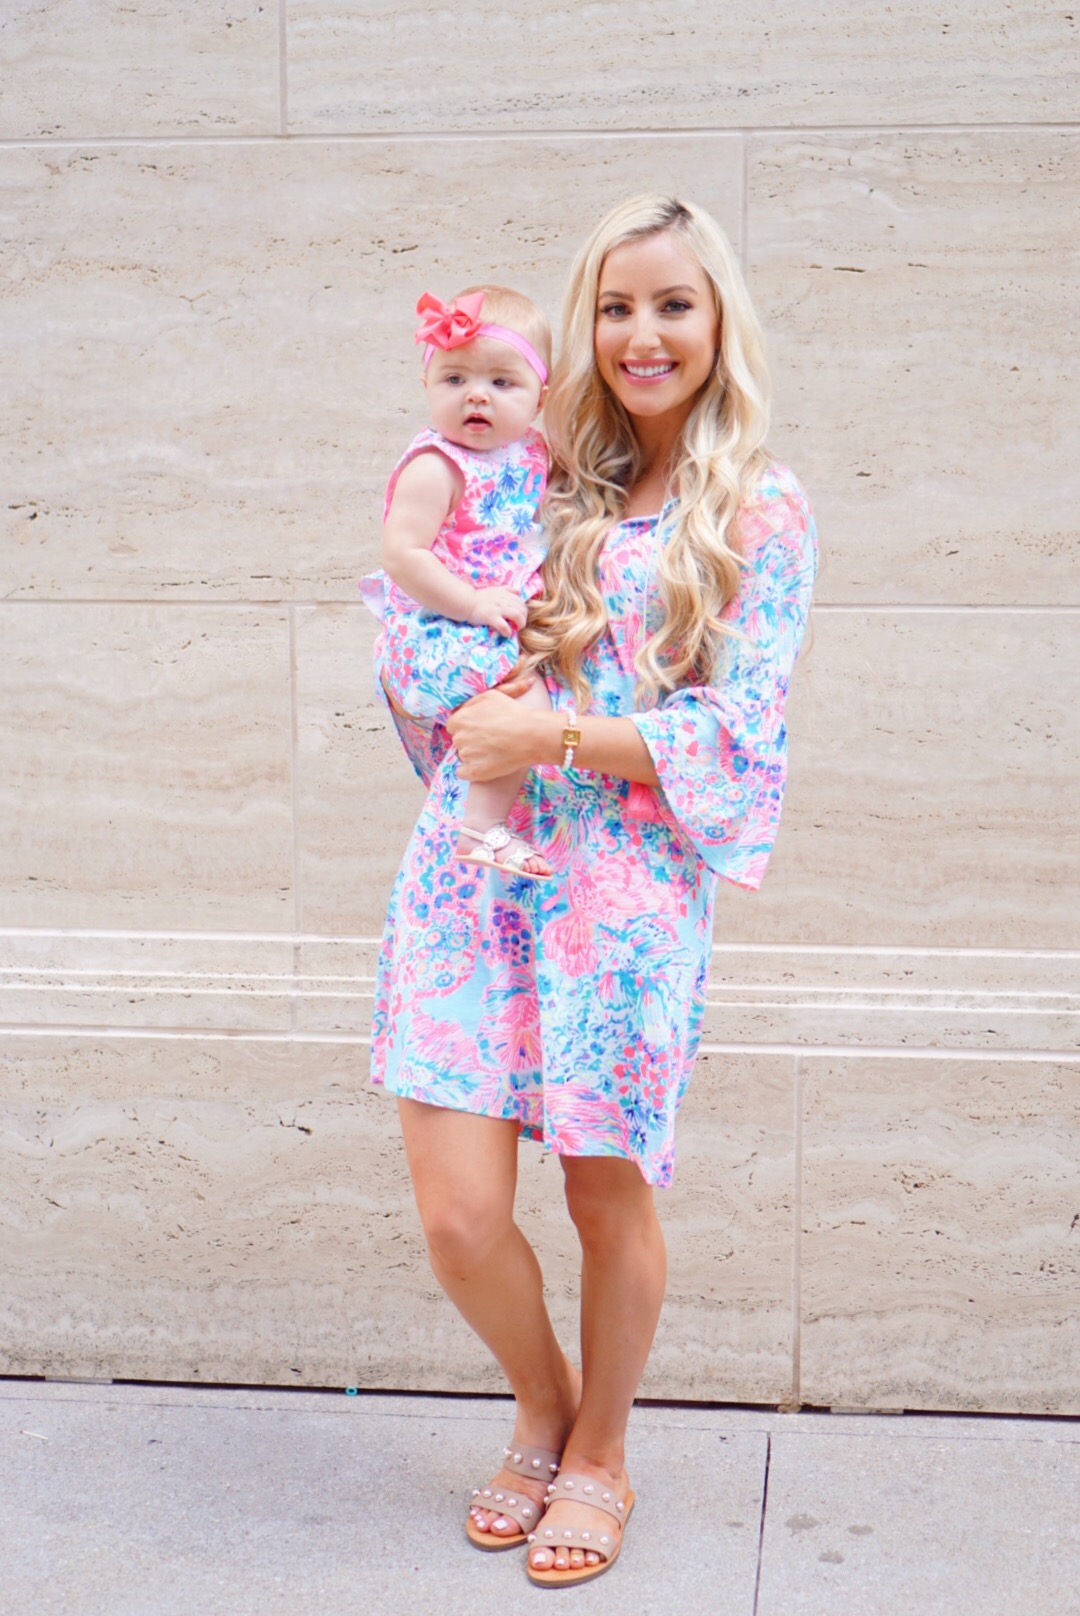 Katelyn Jones A Touch of Pink Blog Baby Girl Thoughts On Motherhood